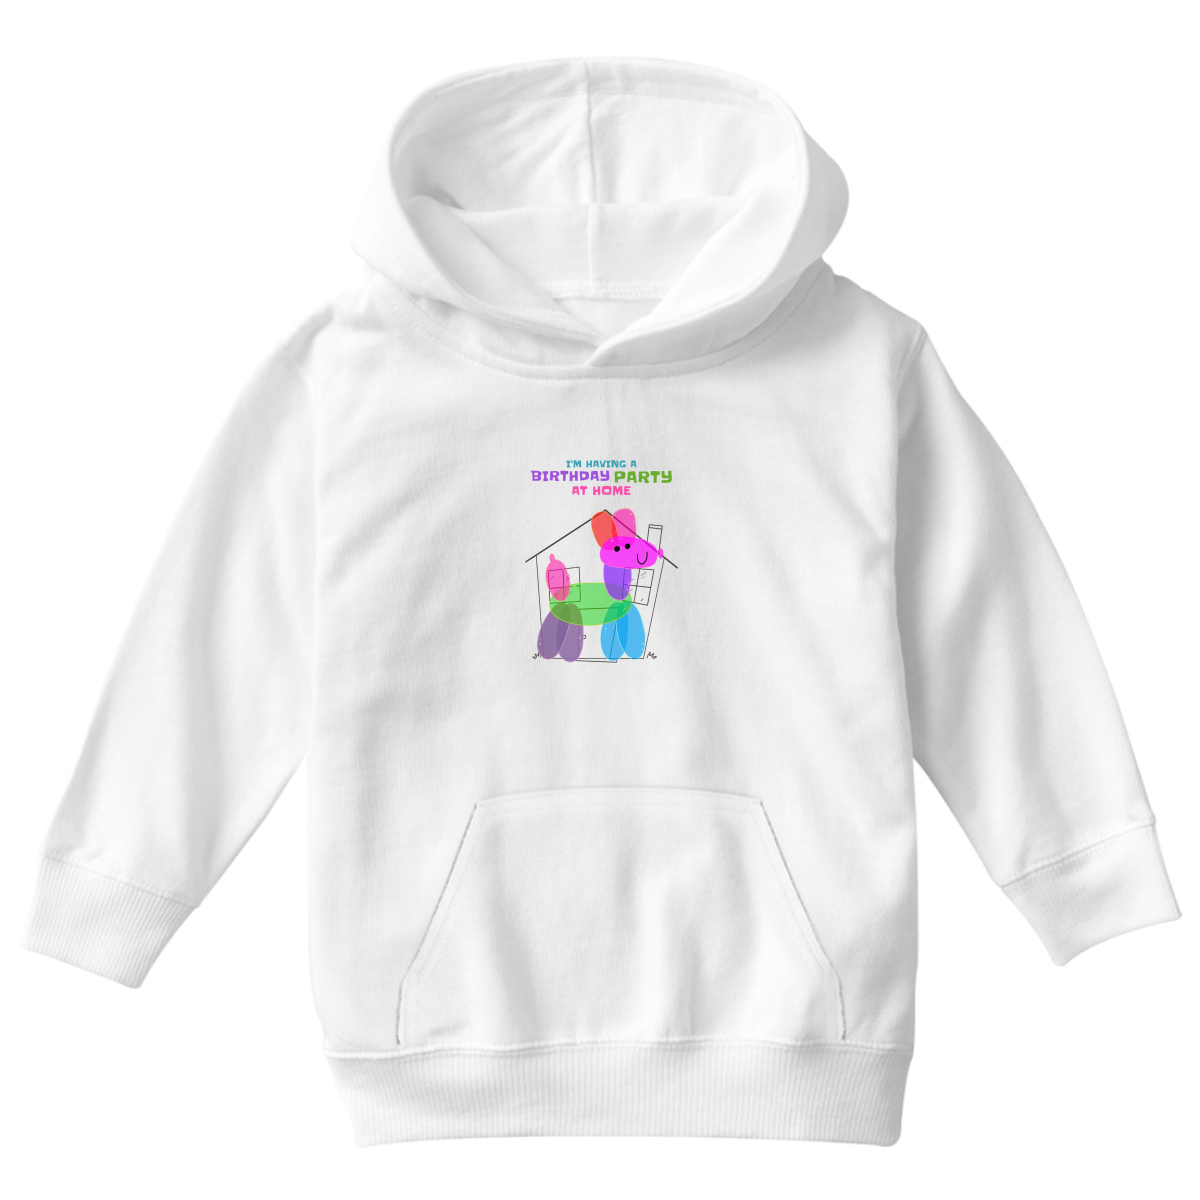 I'm having a birthday party at home  Kids Hoodie | White